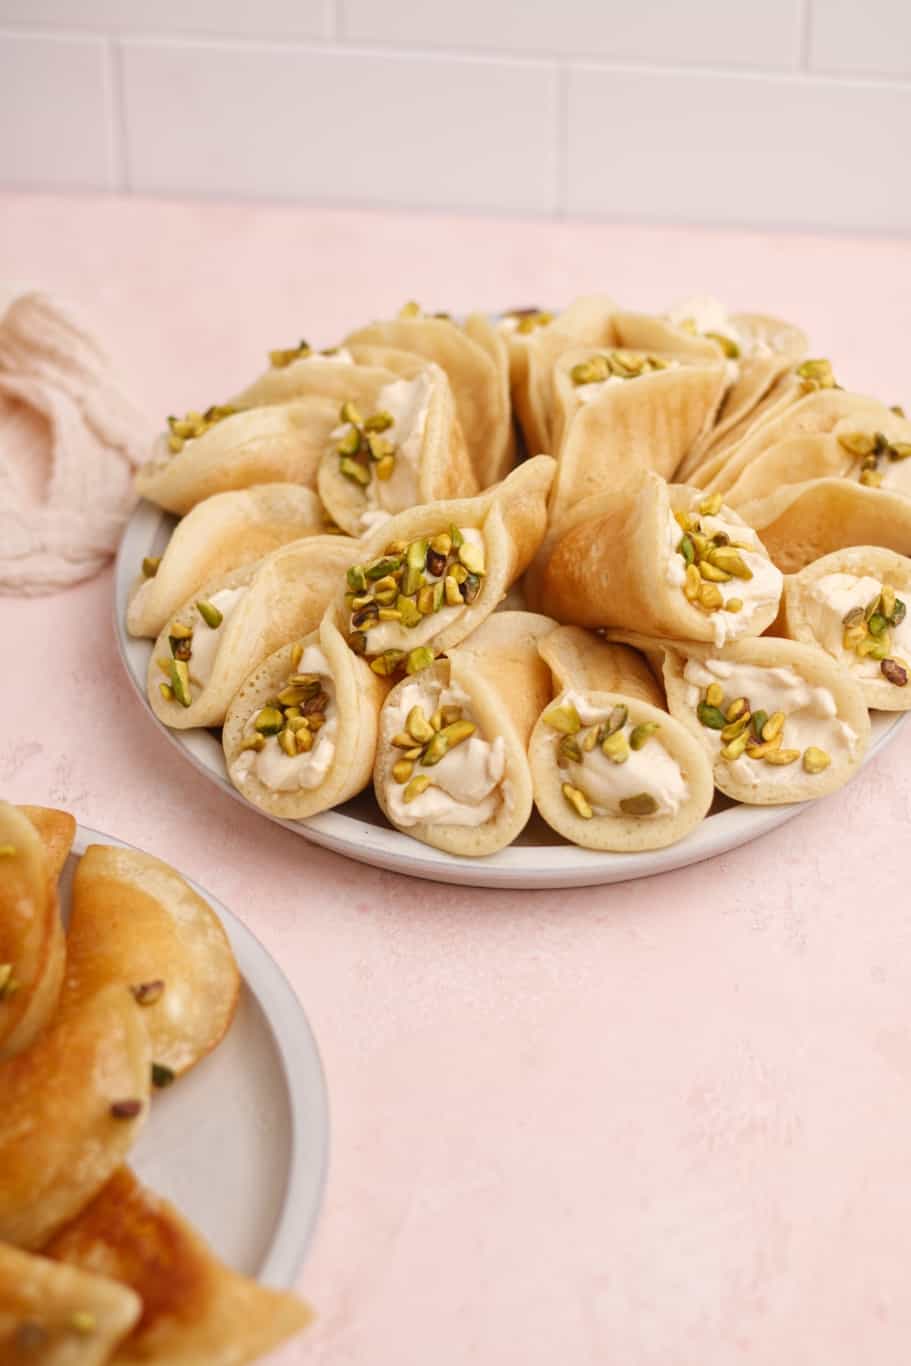 small semolina-yeast pancakes filled with ashta cream and topped with crushed pistachios